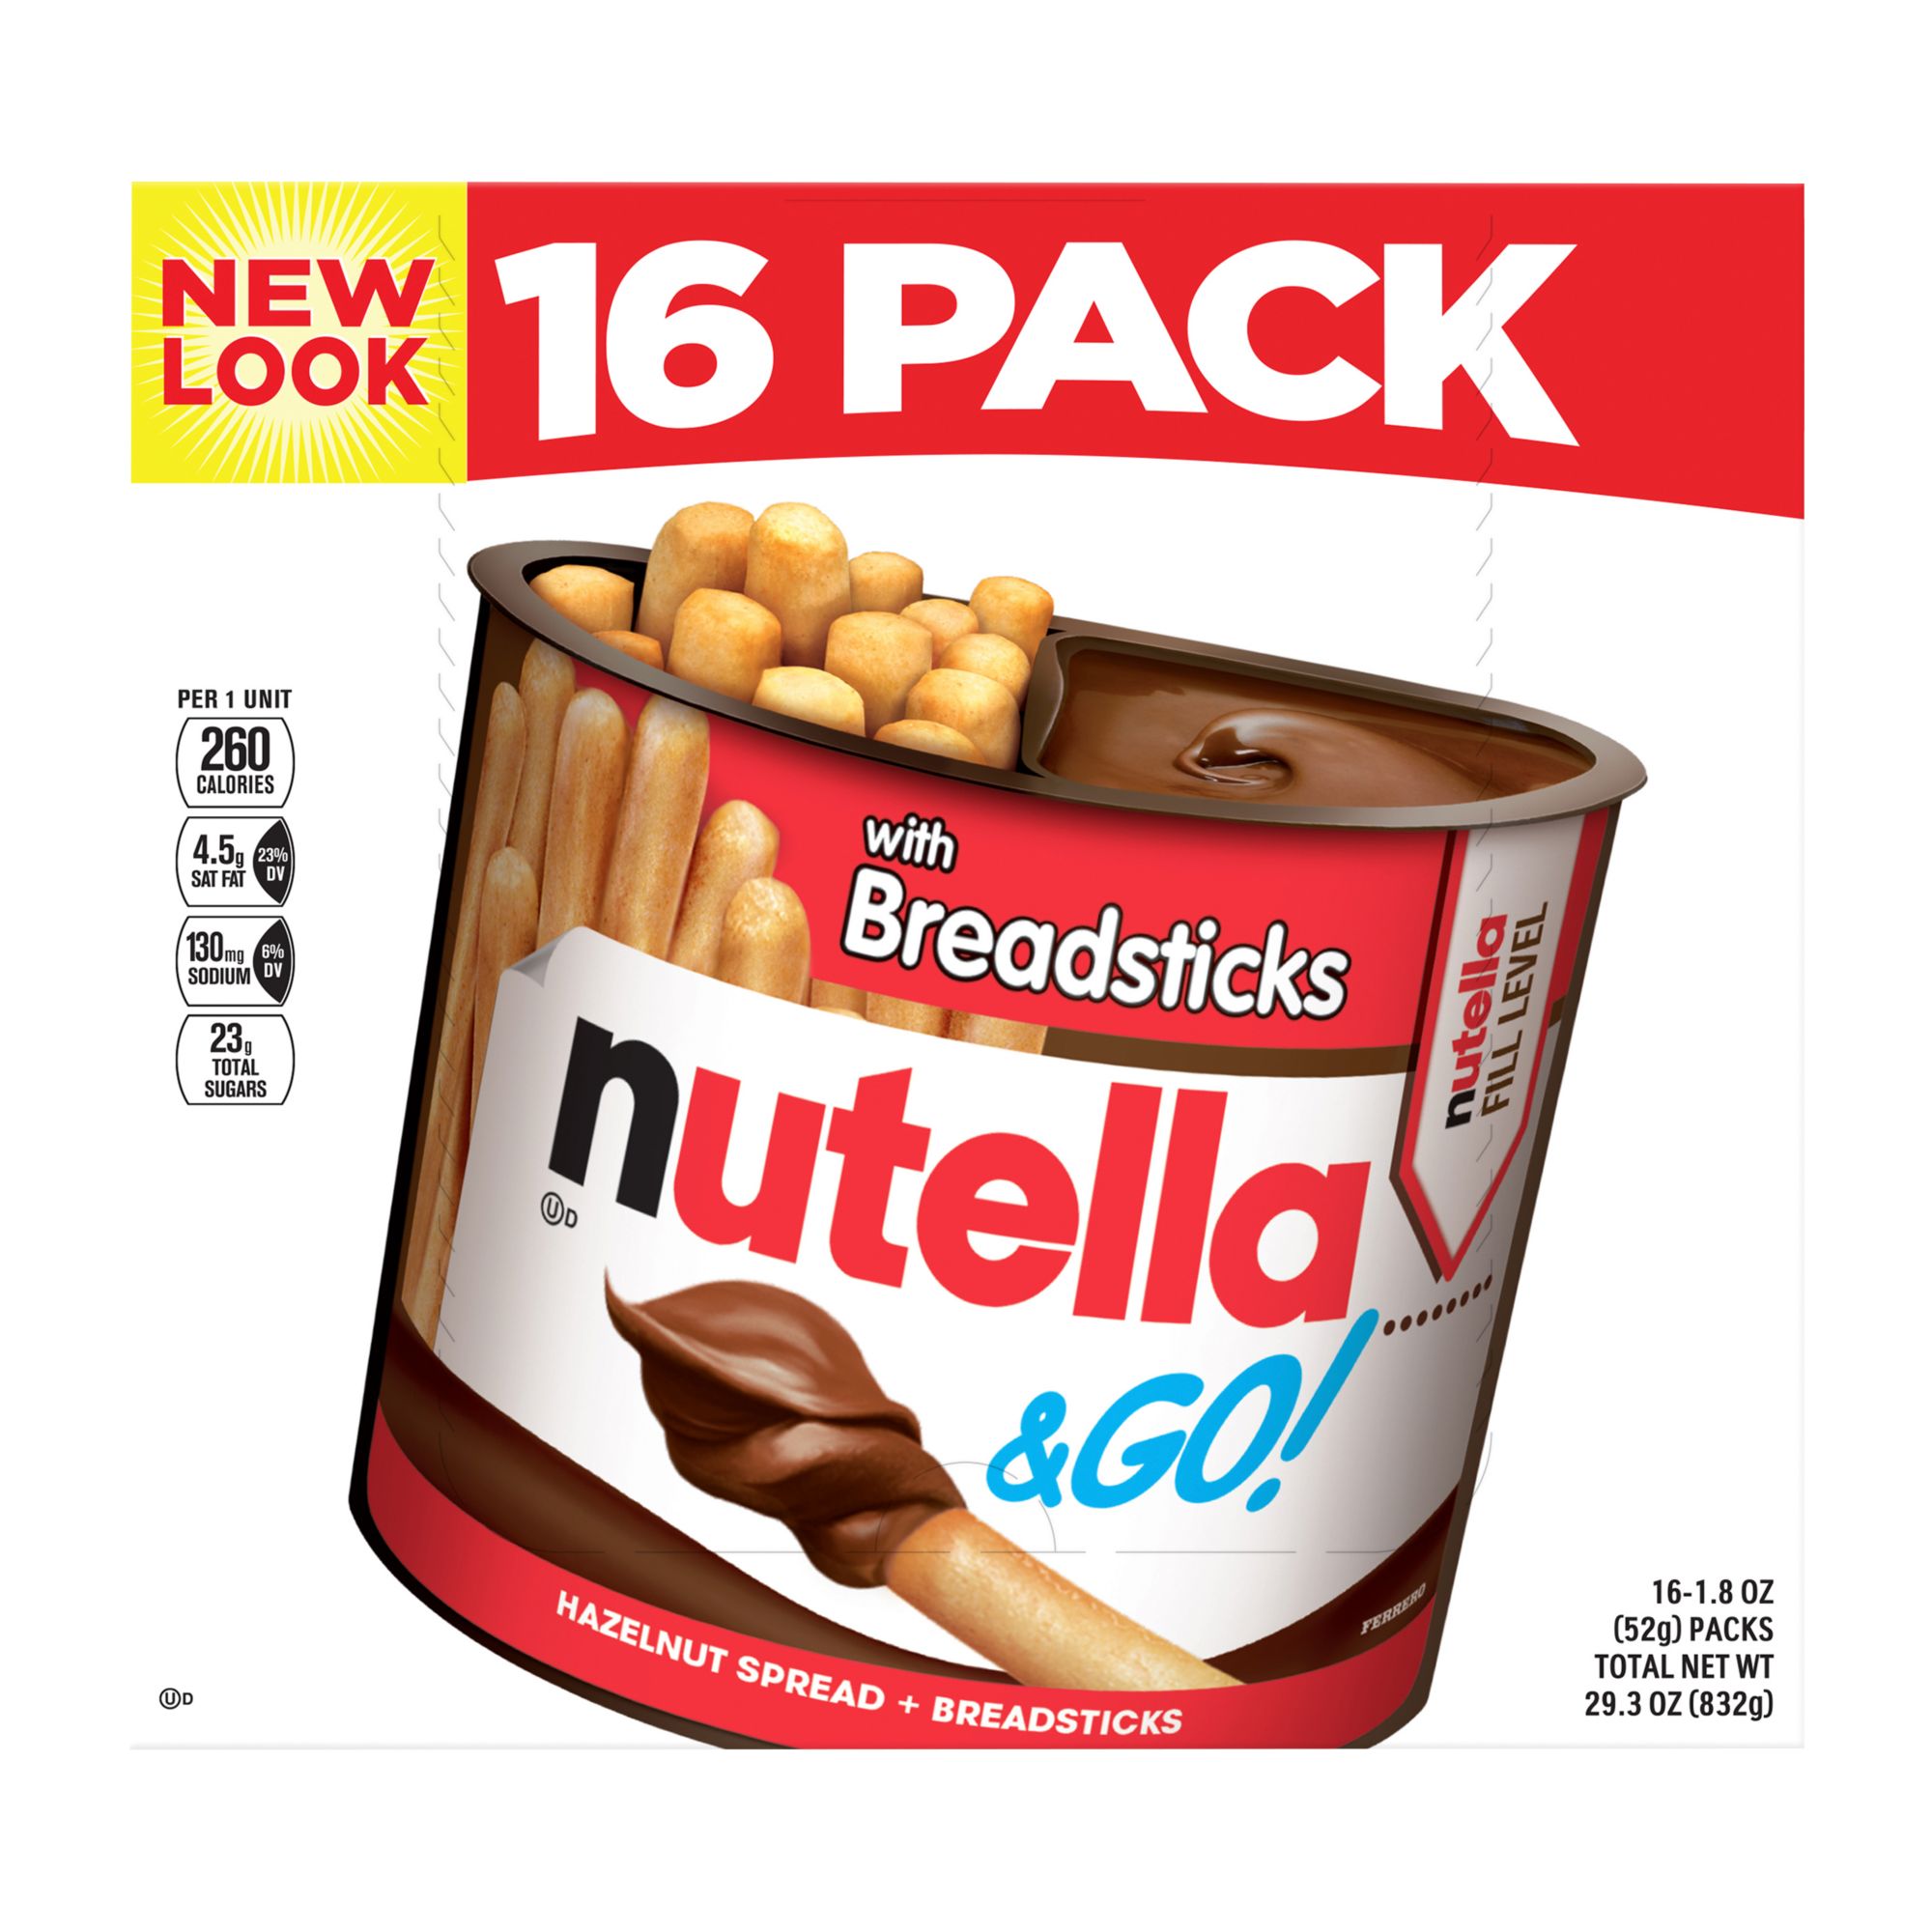 Nutella & Go with Breadsticks, 16 ct./1.8 oz.